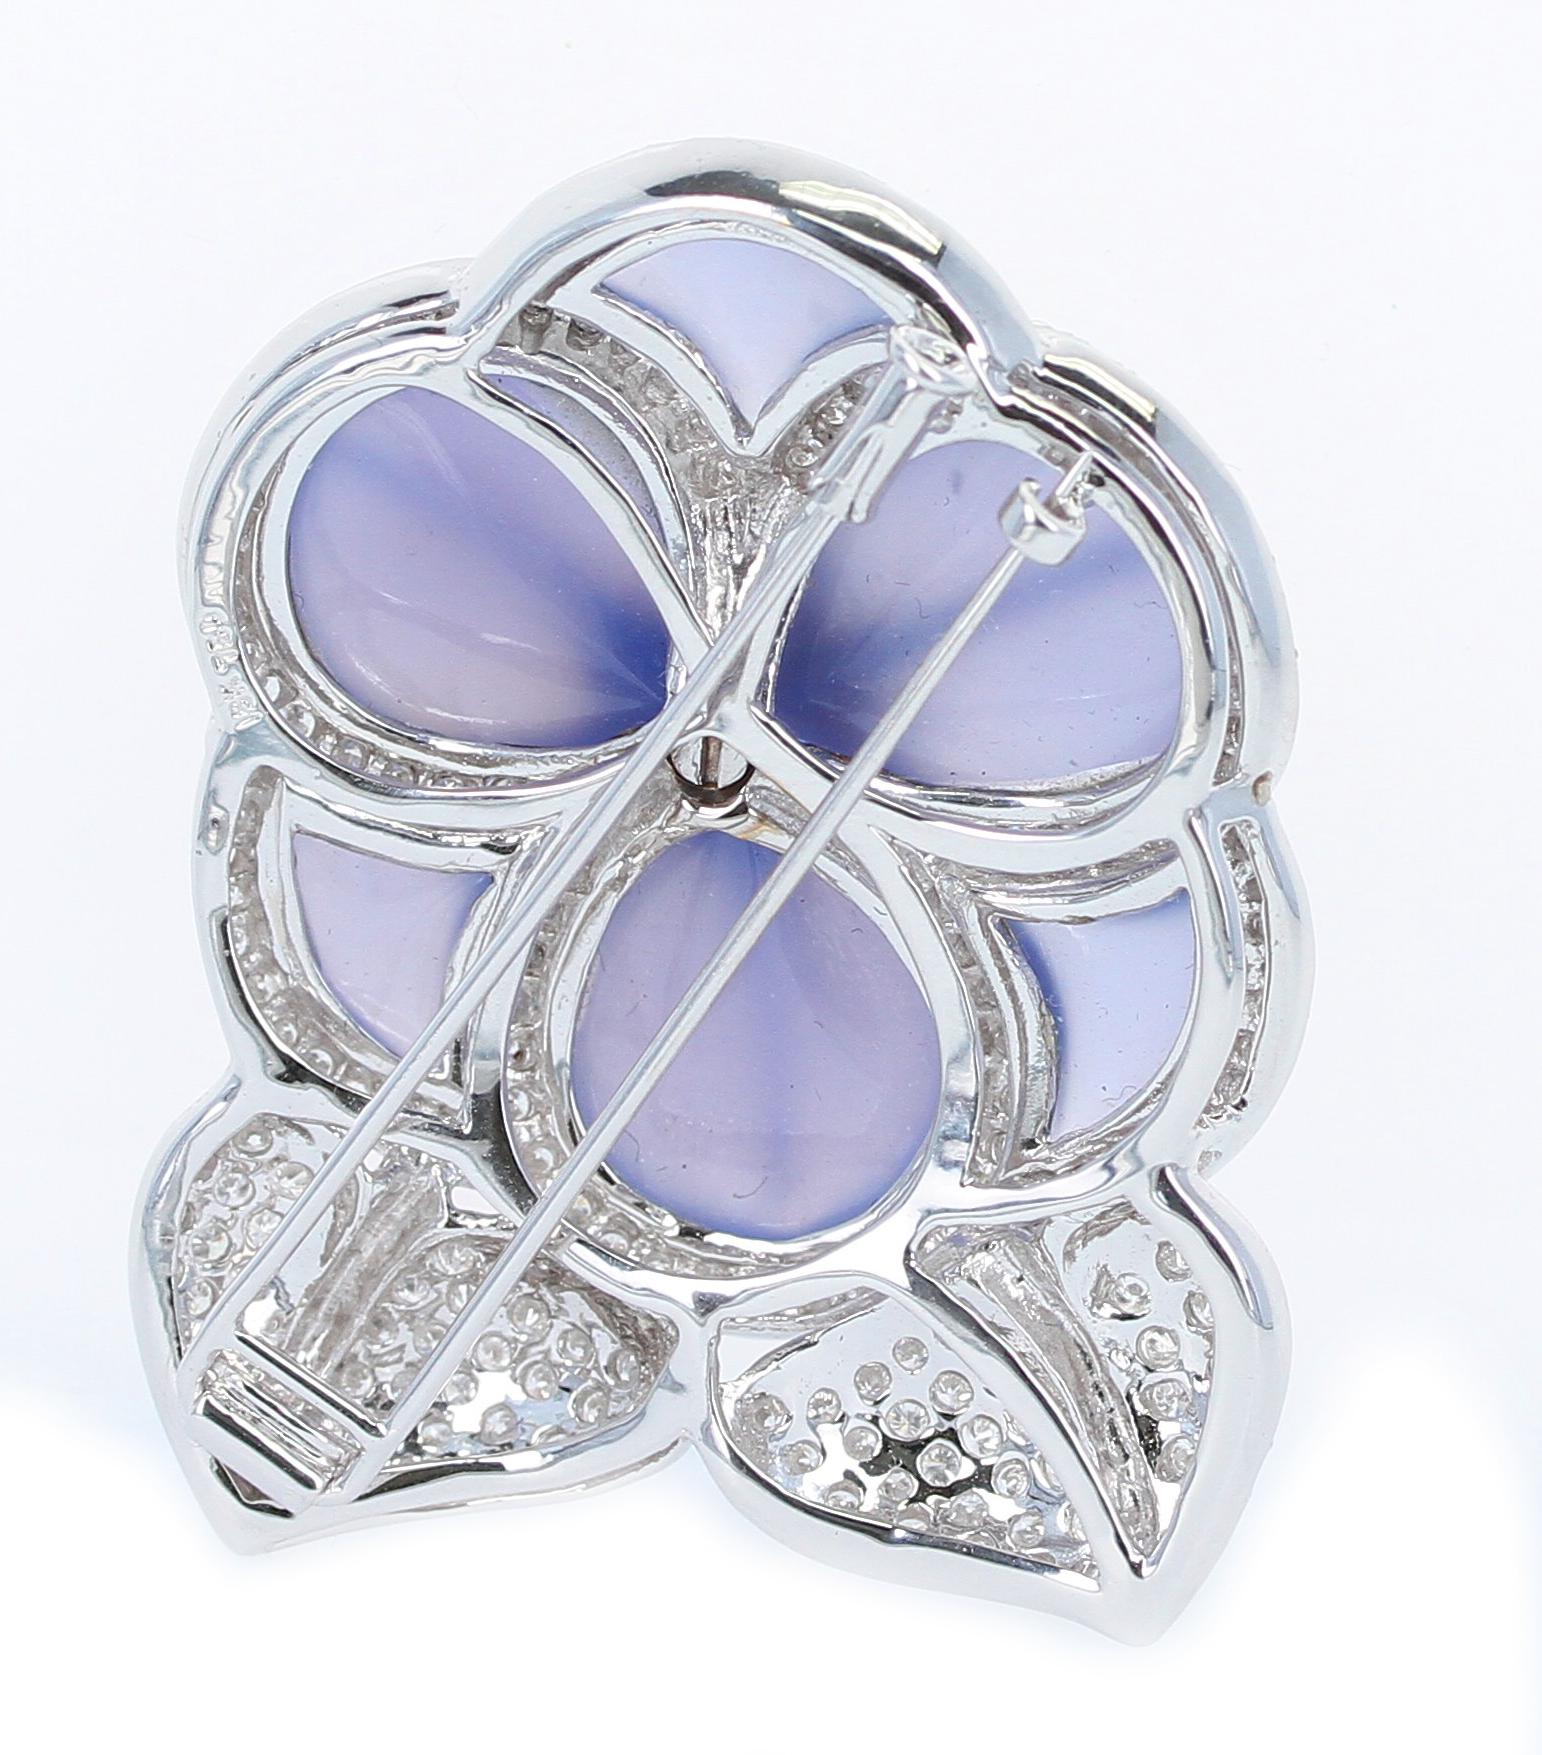 A stunning carved chalcedony brooch accented with sapphire cabochons and diamonds. The chalcedony acts as petals and the sapphire cabochons are the pistil of the flower. The round diamonds are the leaves of the flowers. 18K White Gold. 2 x 1 1/2